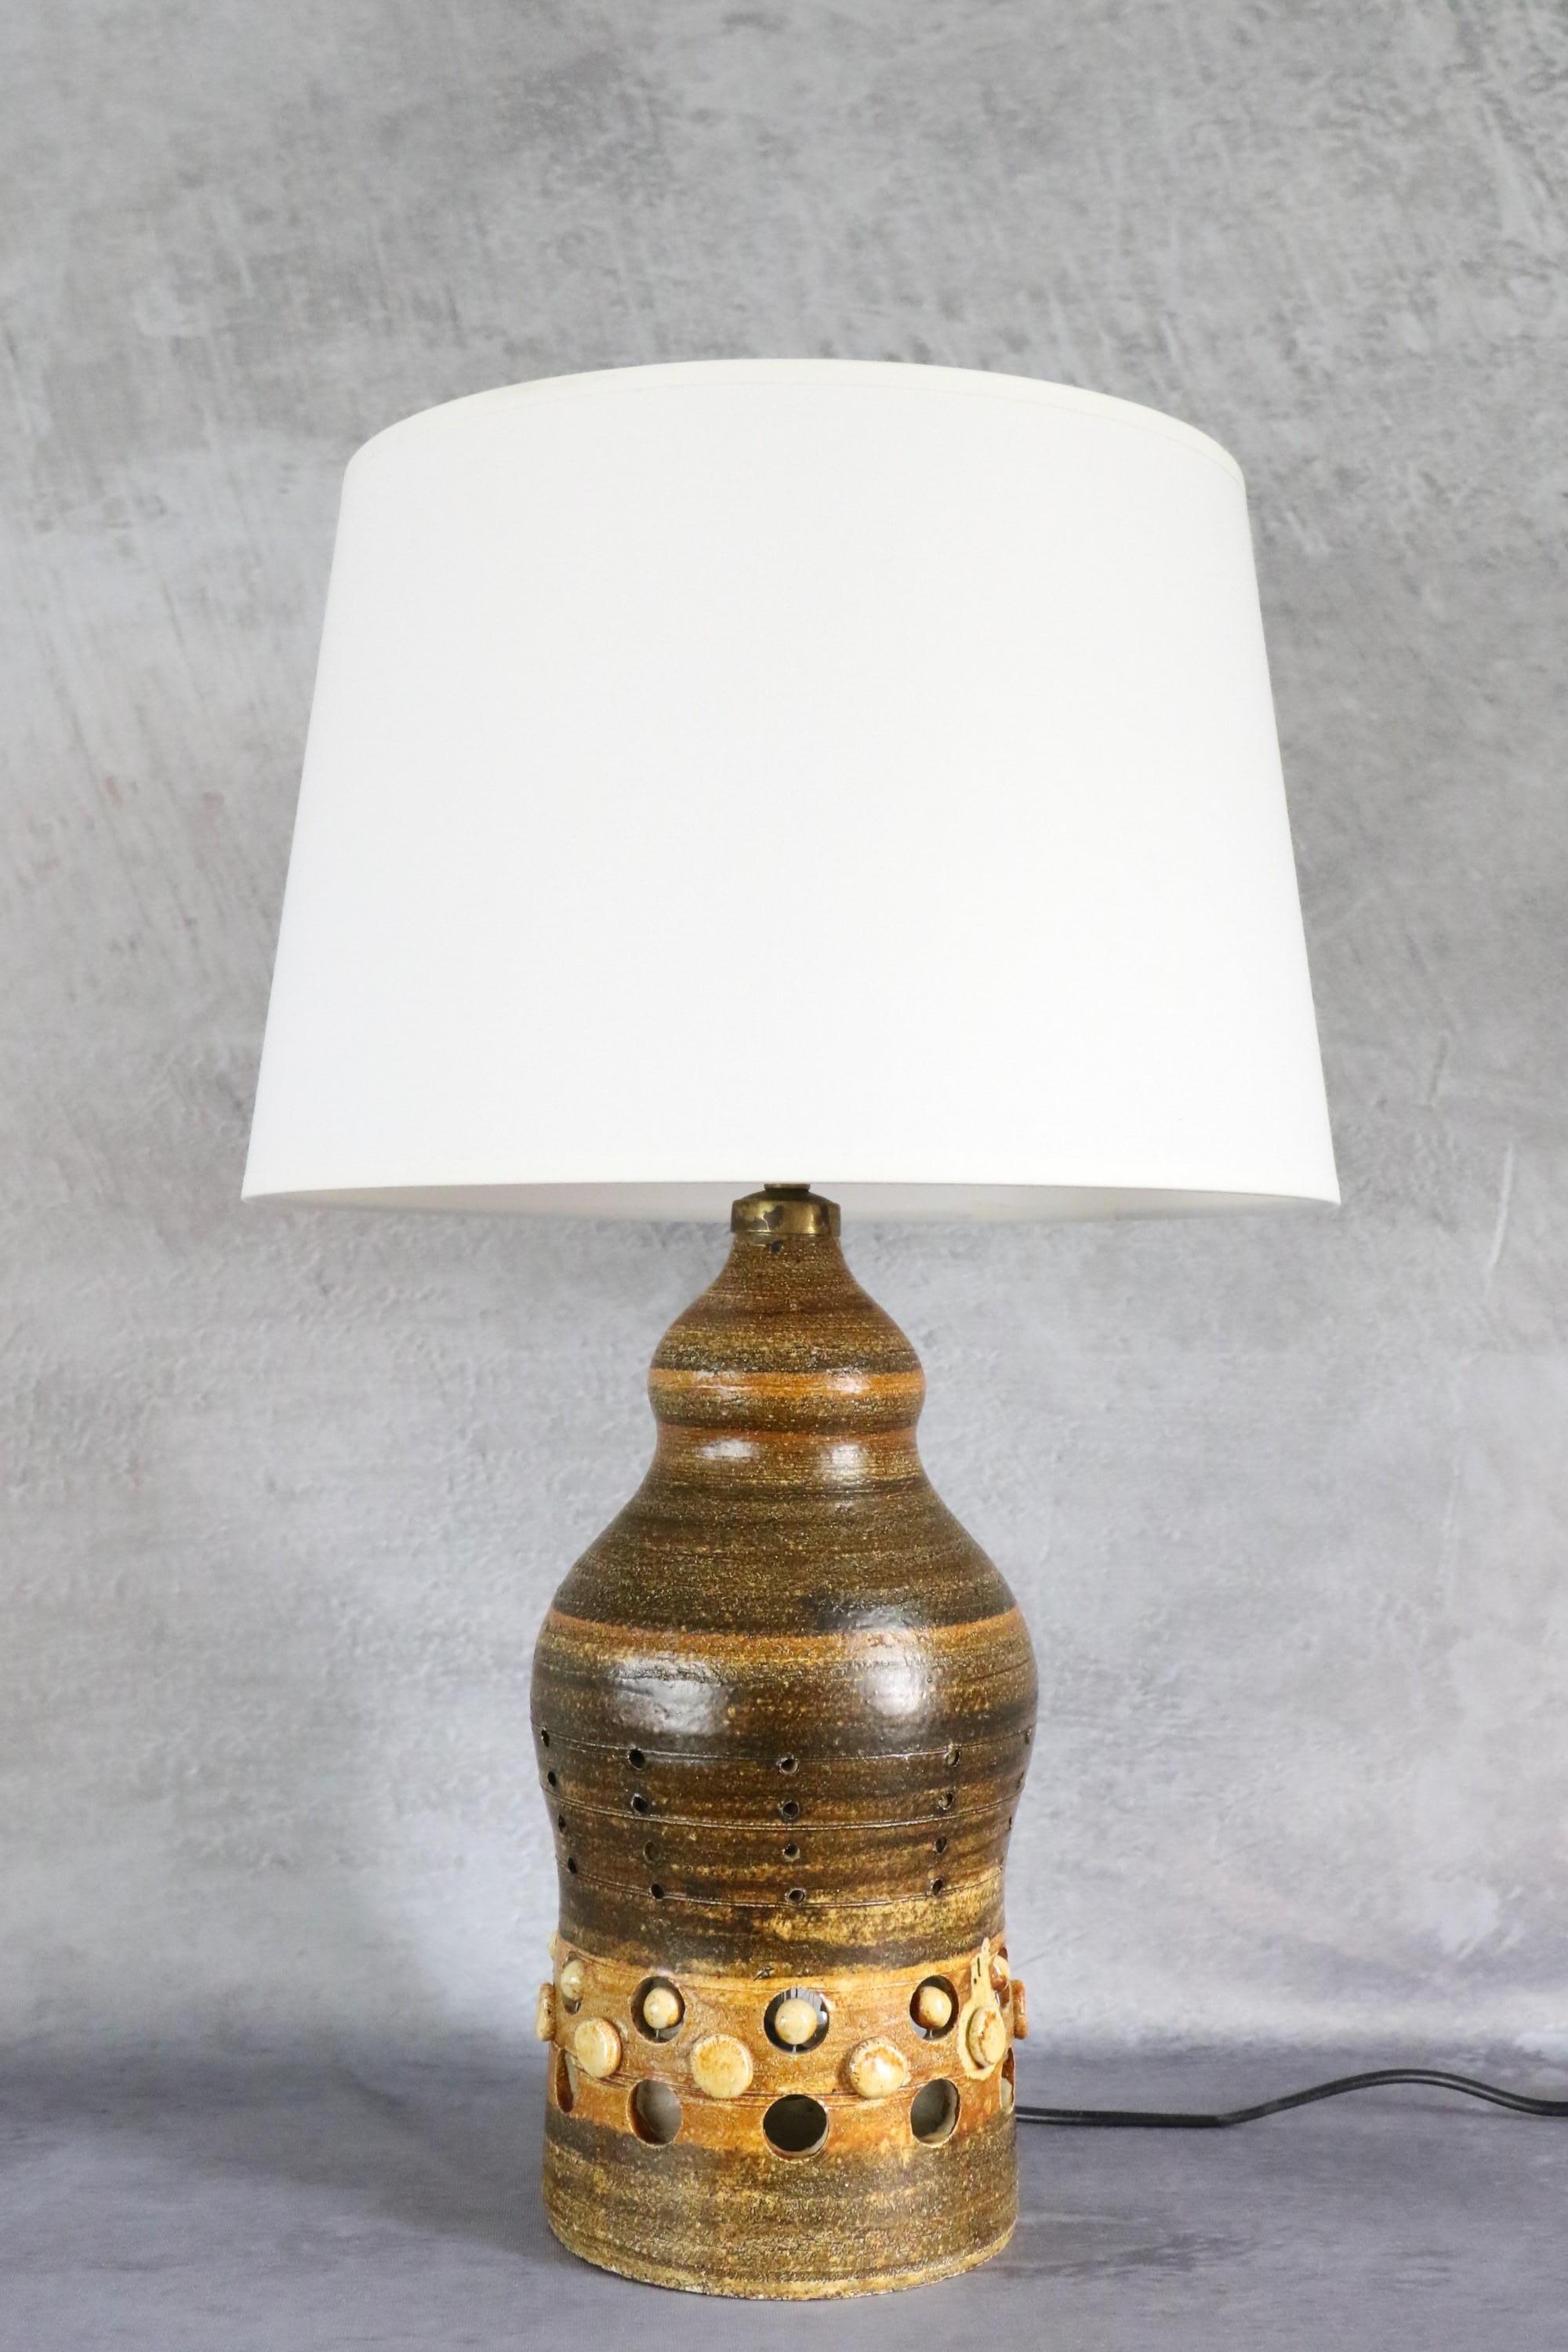 Enameled Double Lighting French Ceramic Lamp by Georges Pelletier, 1970s For Sale